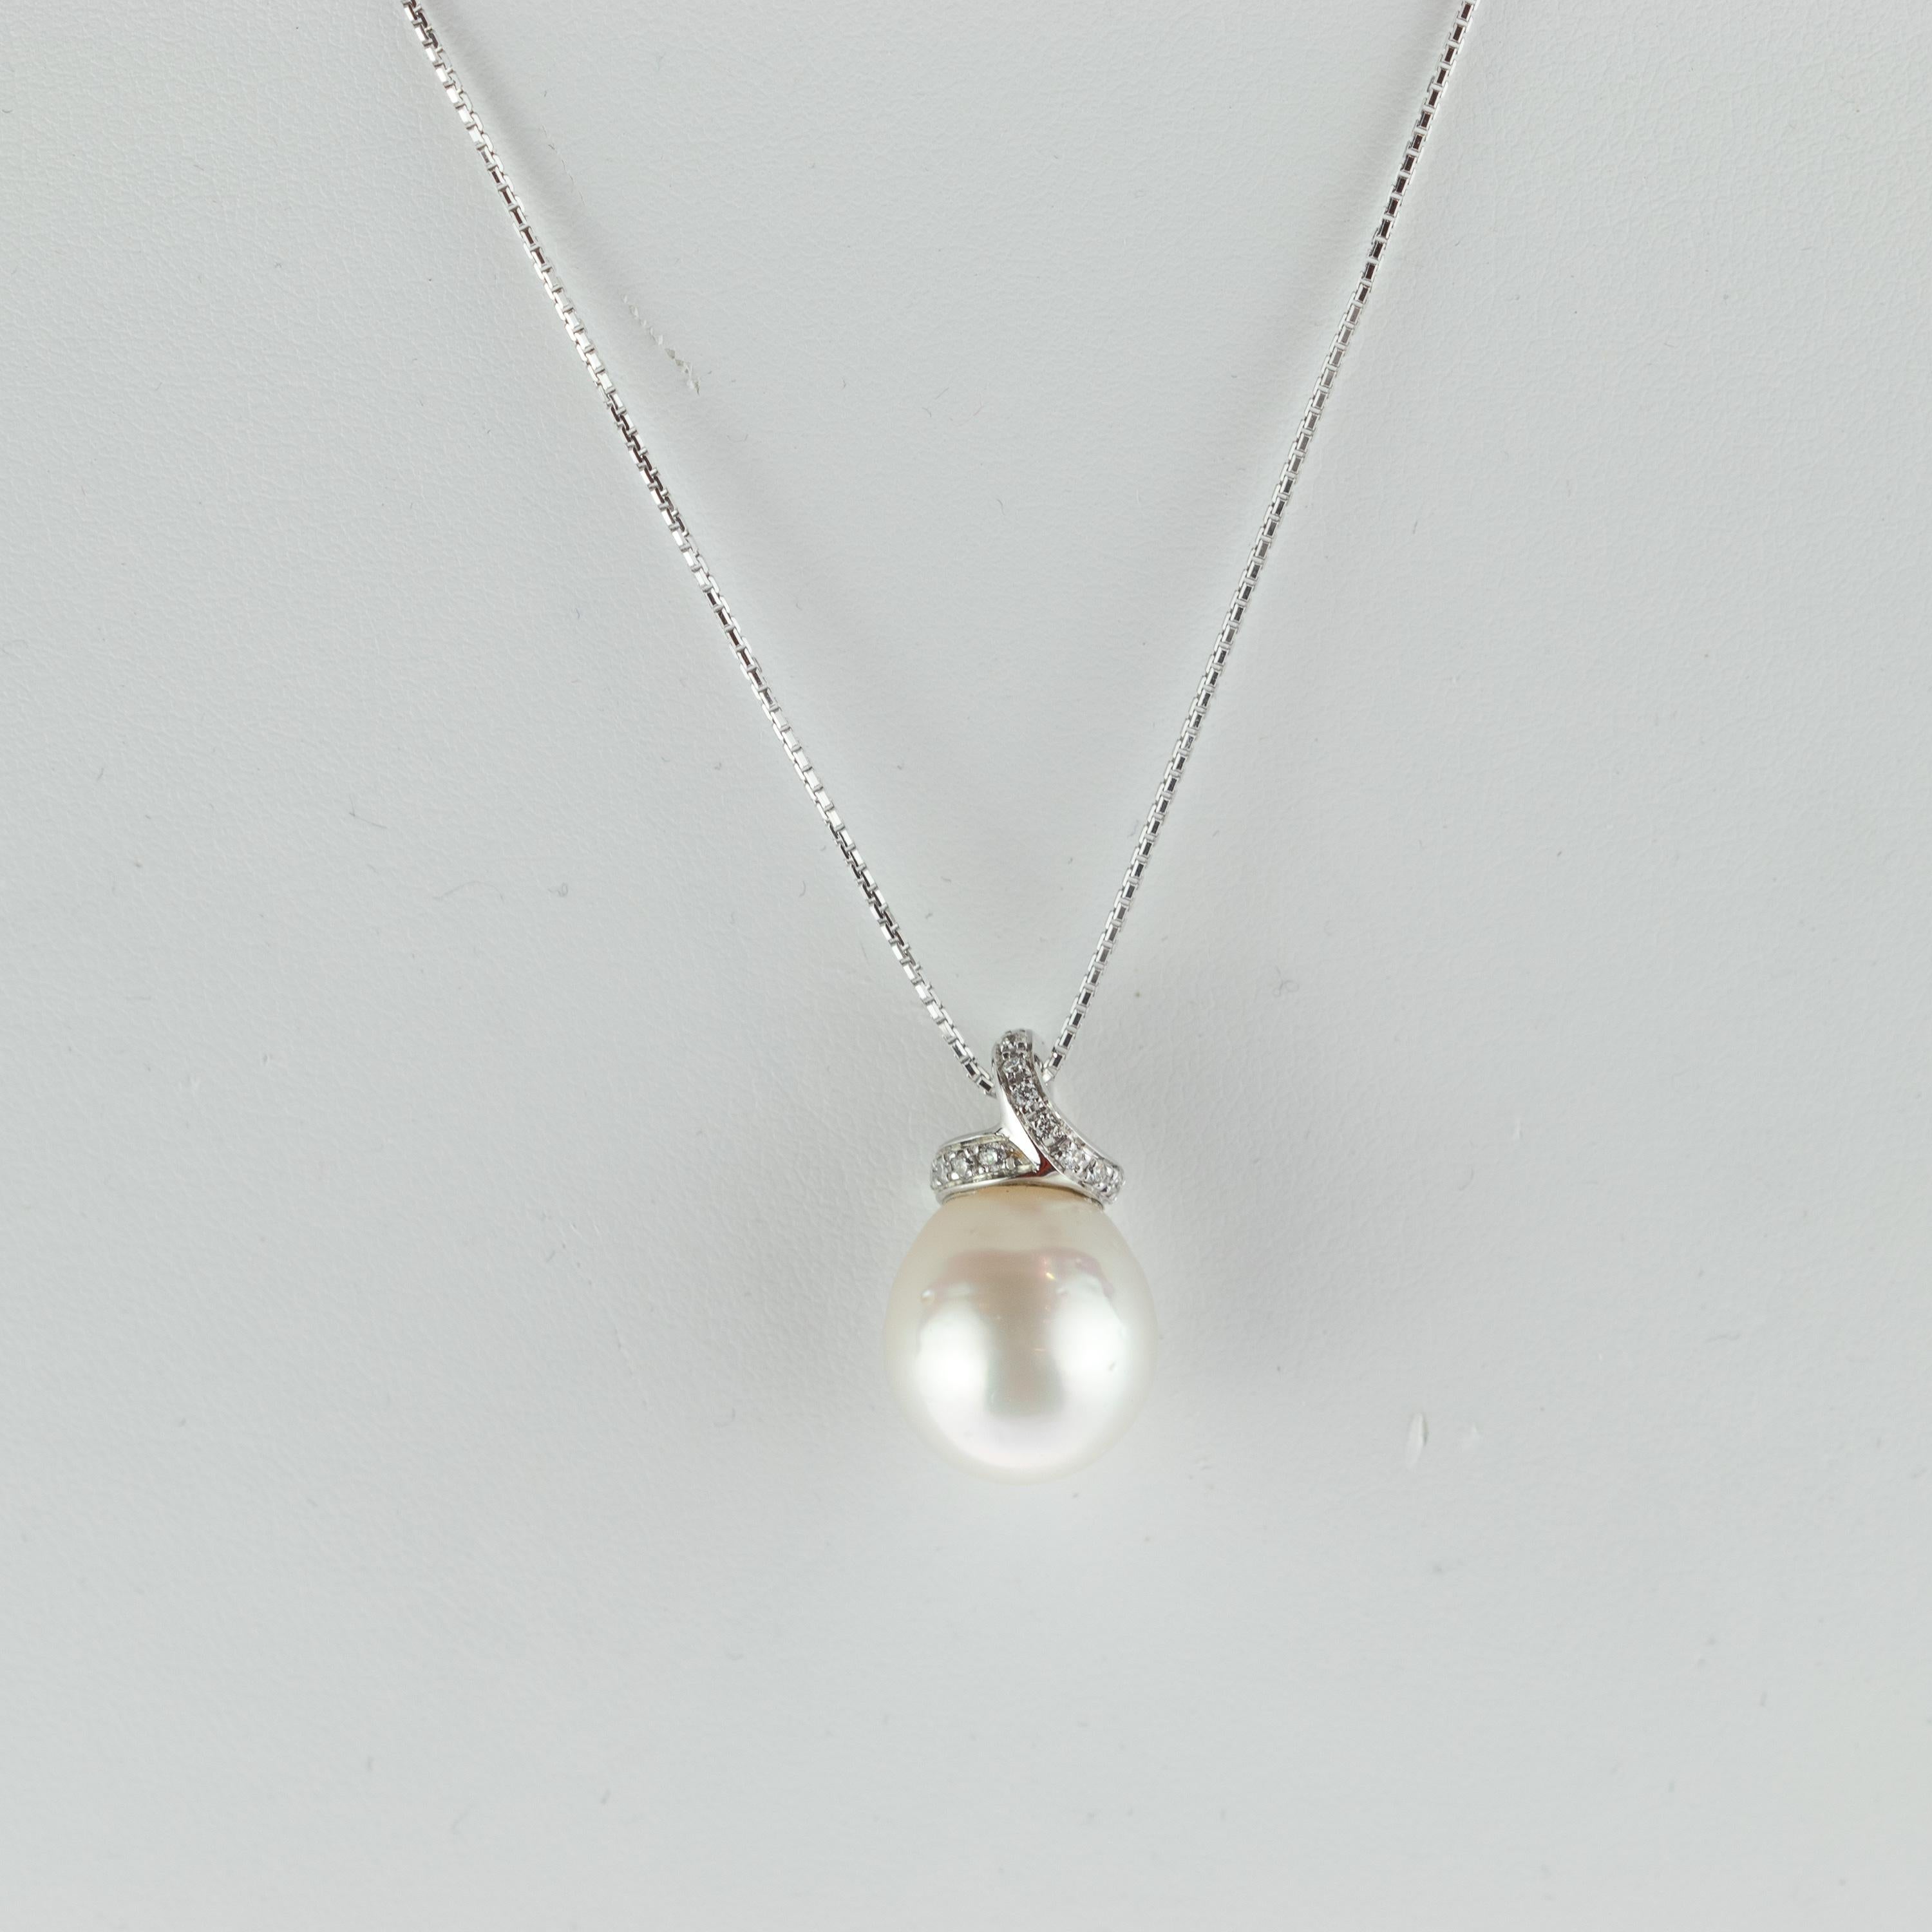 Timeless design of a 18 karat white gold chain necklace with a stunning natural 23.22 carat pearl with a crown of 0.15 carat diamonds pendant. This design shows the simple and unique beauty of a special accessory that will surely enrich with beauty